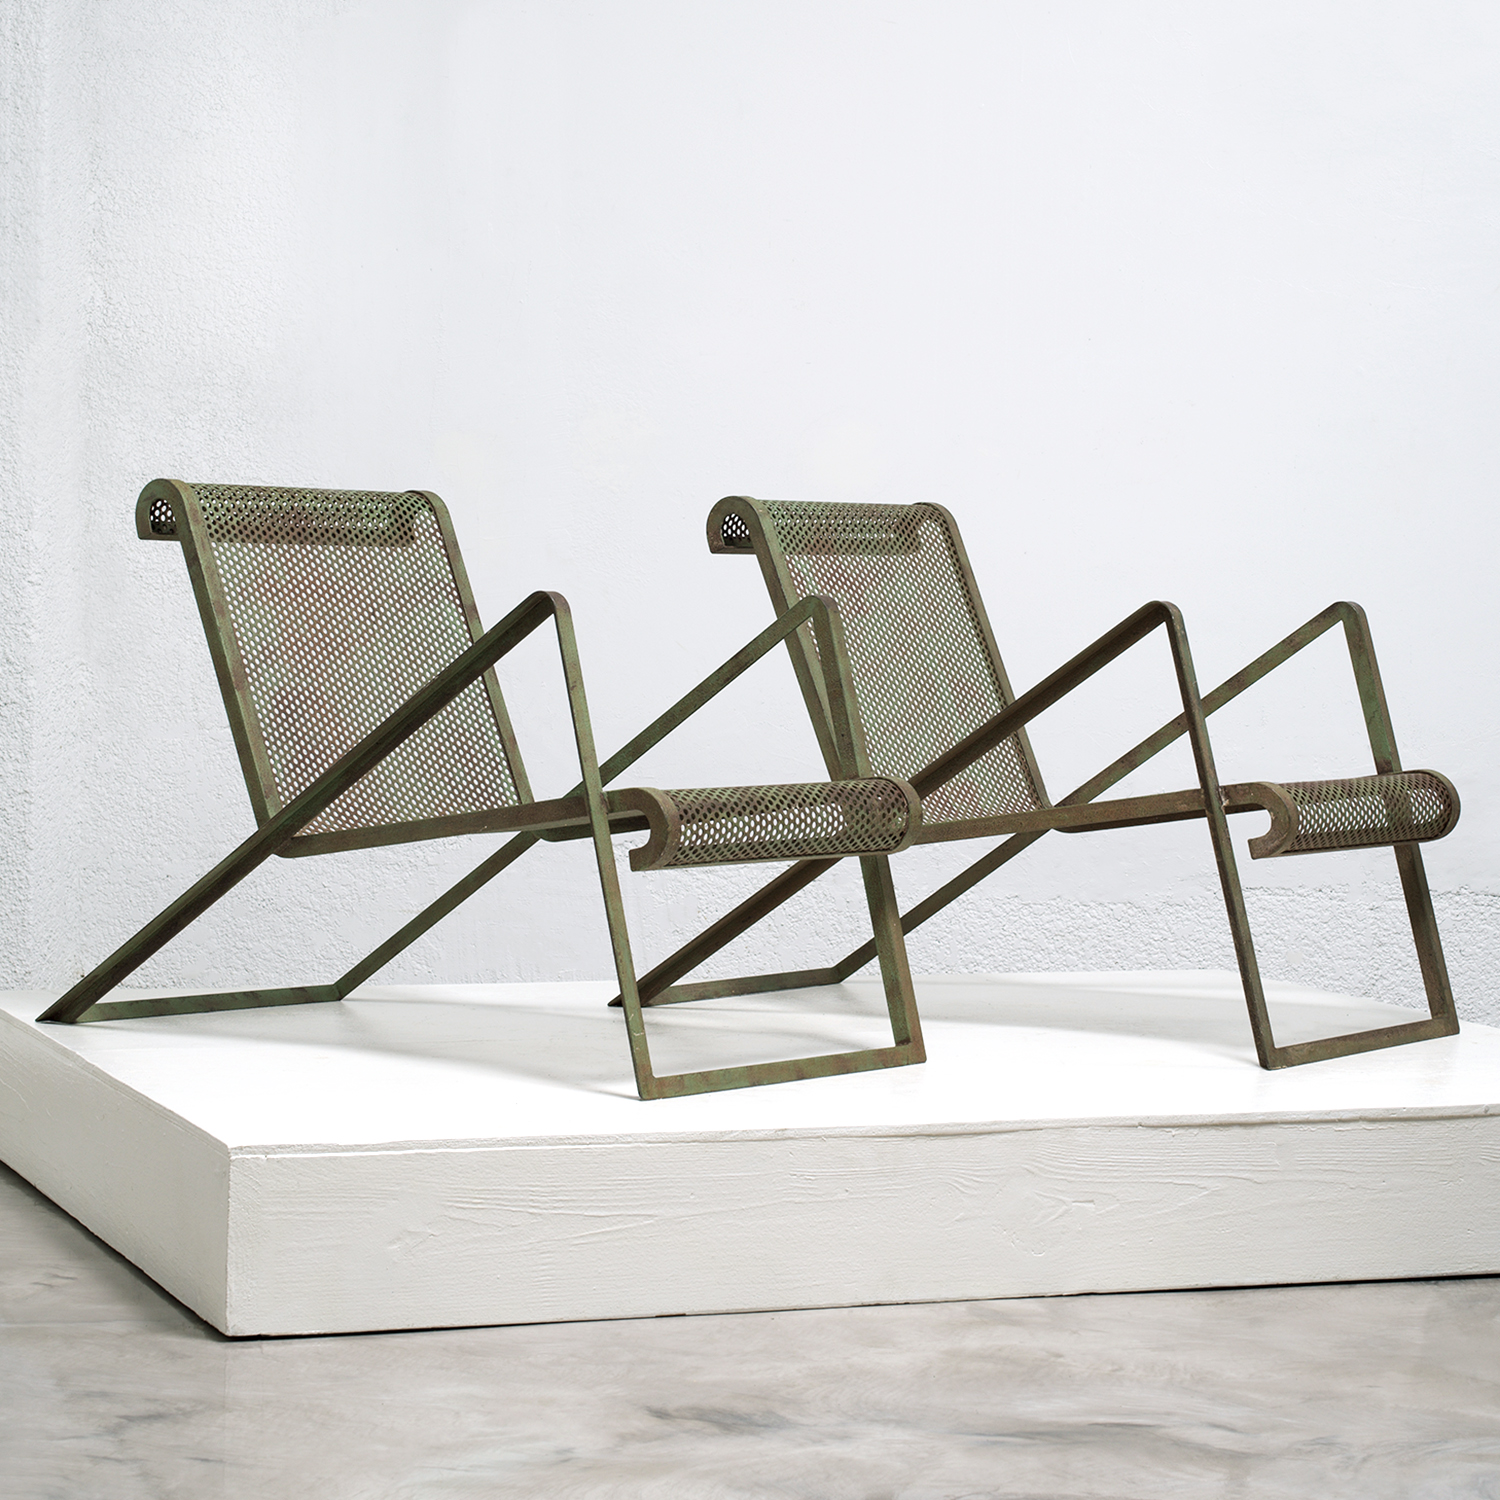 20th Century French Pair of Tubular Metal Chaise Lounge Chairs by Jean Royère